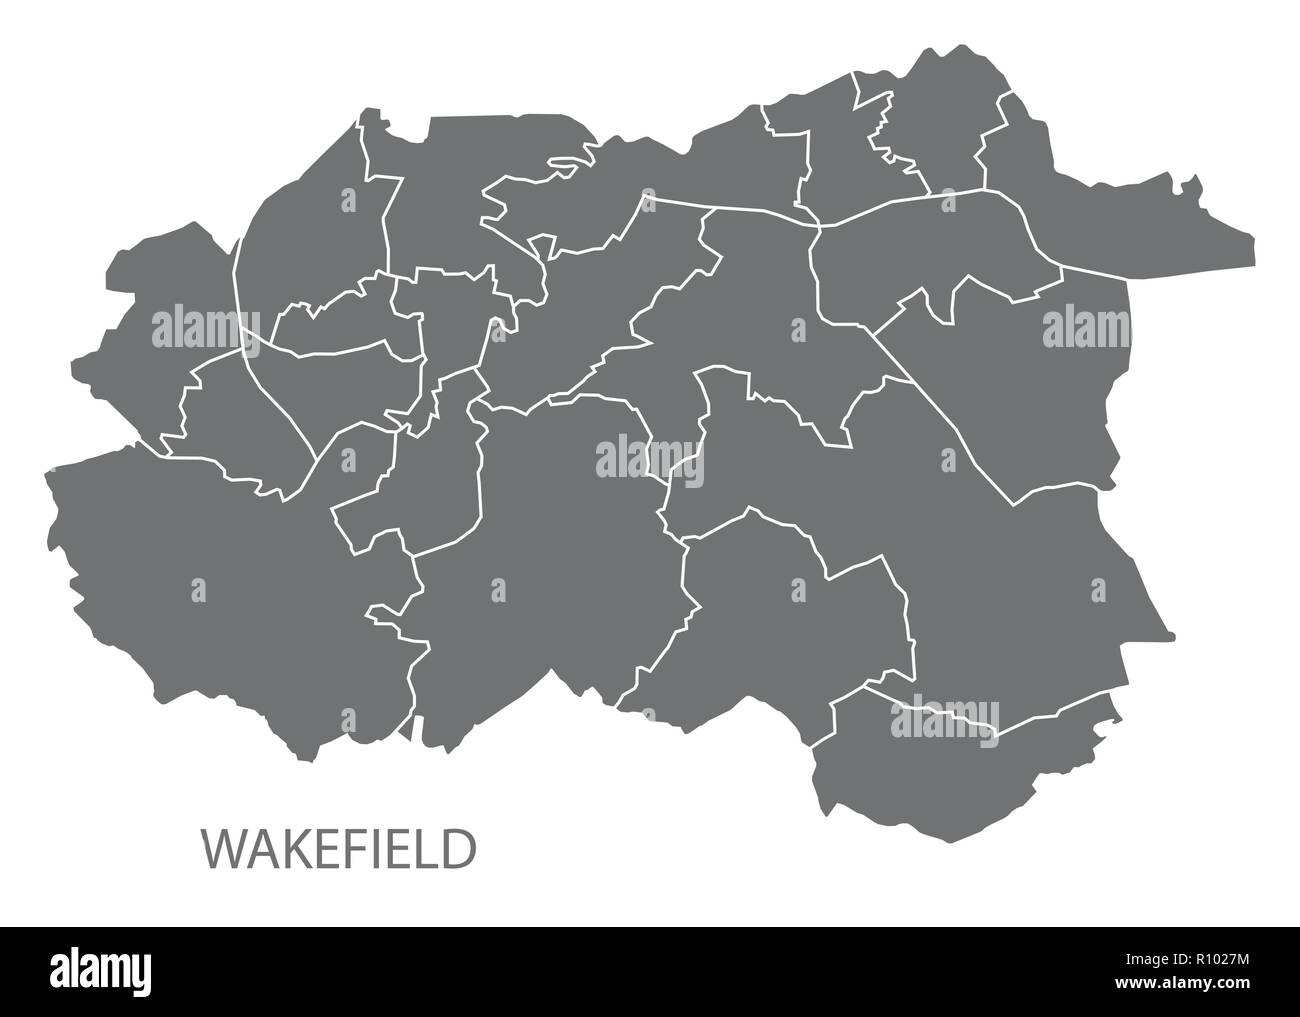 Wakefield city map with wards grey illustration silhouette shape Stock Vector